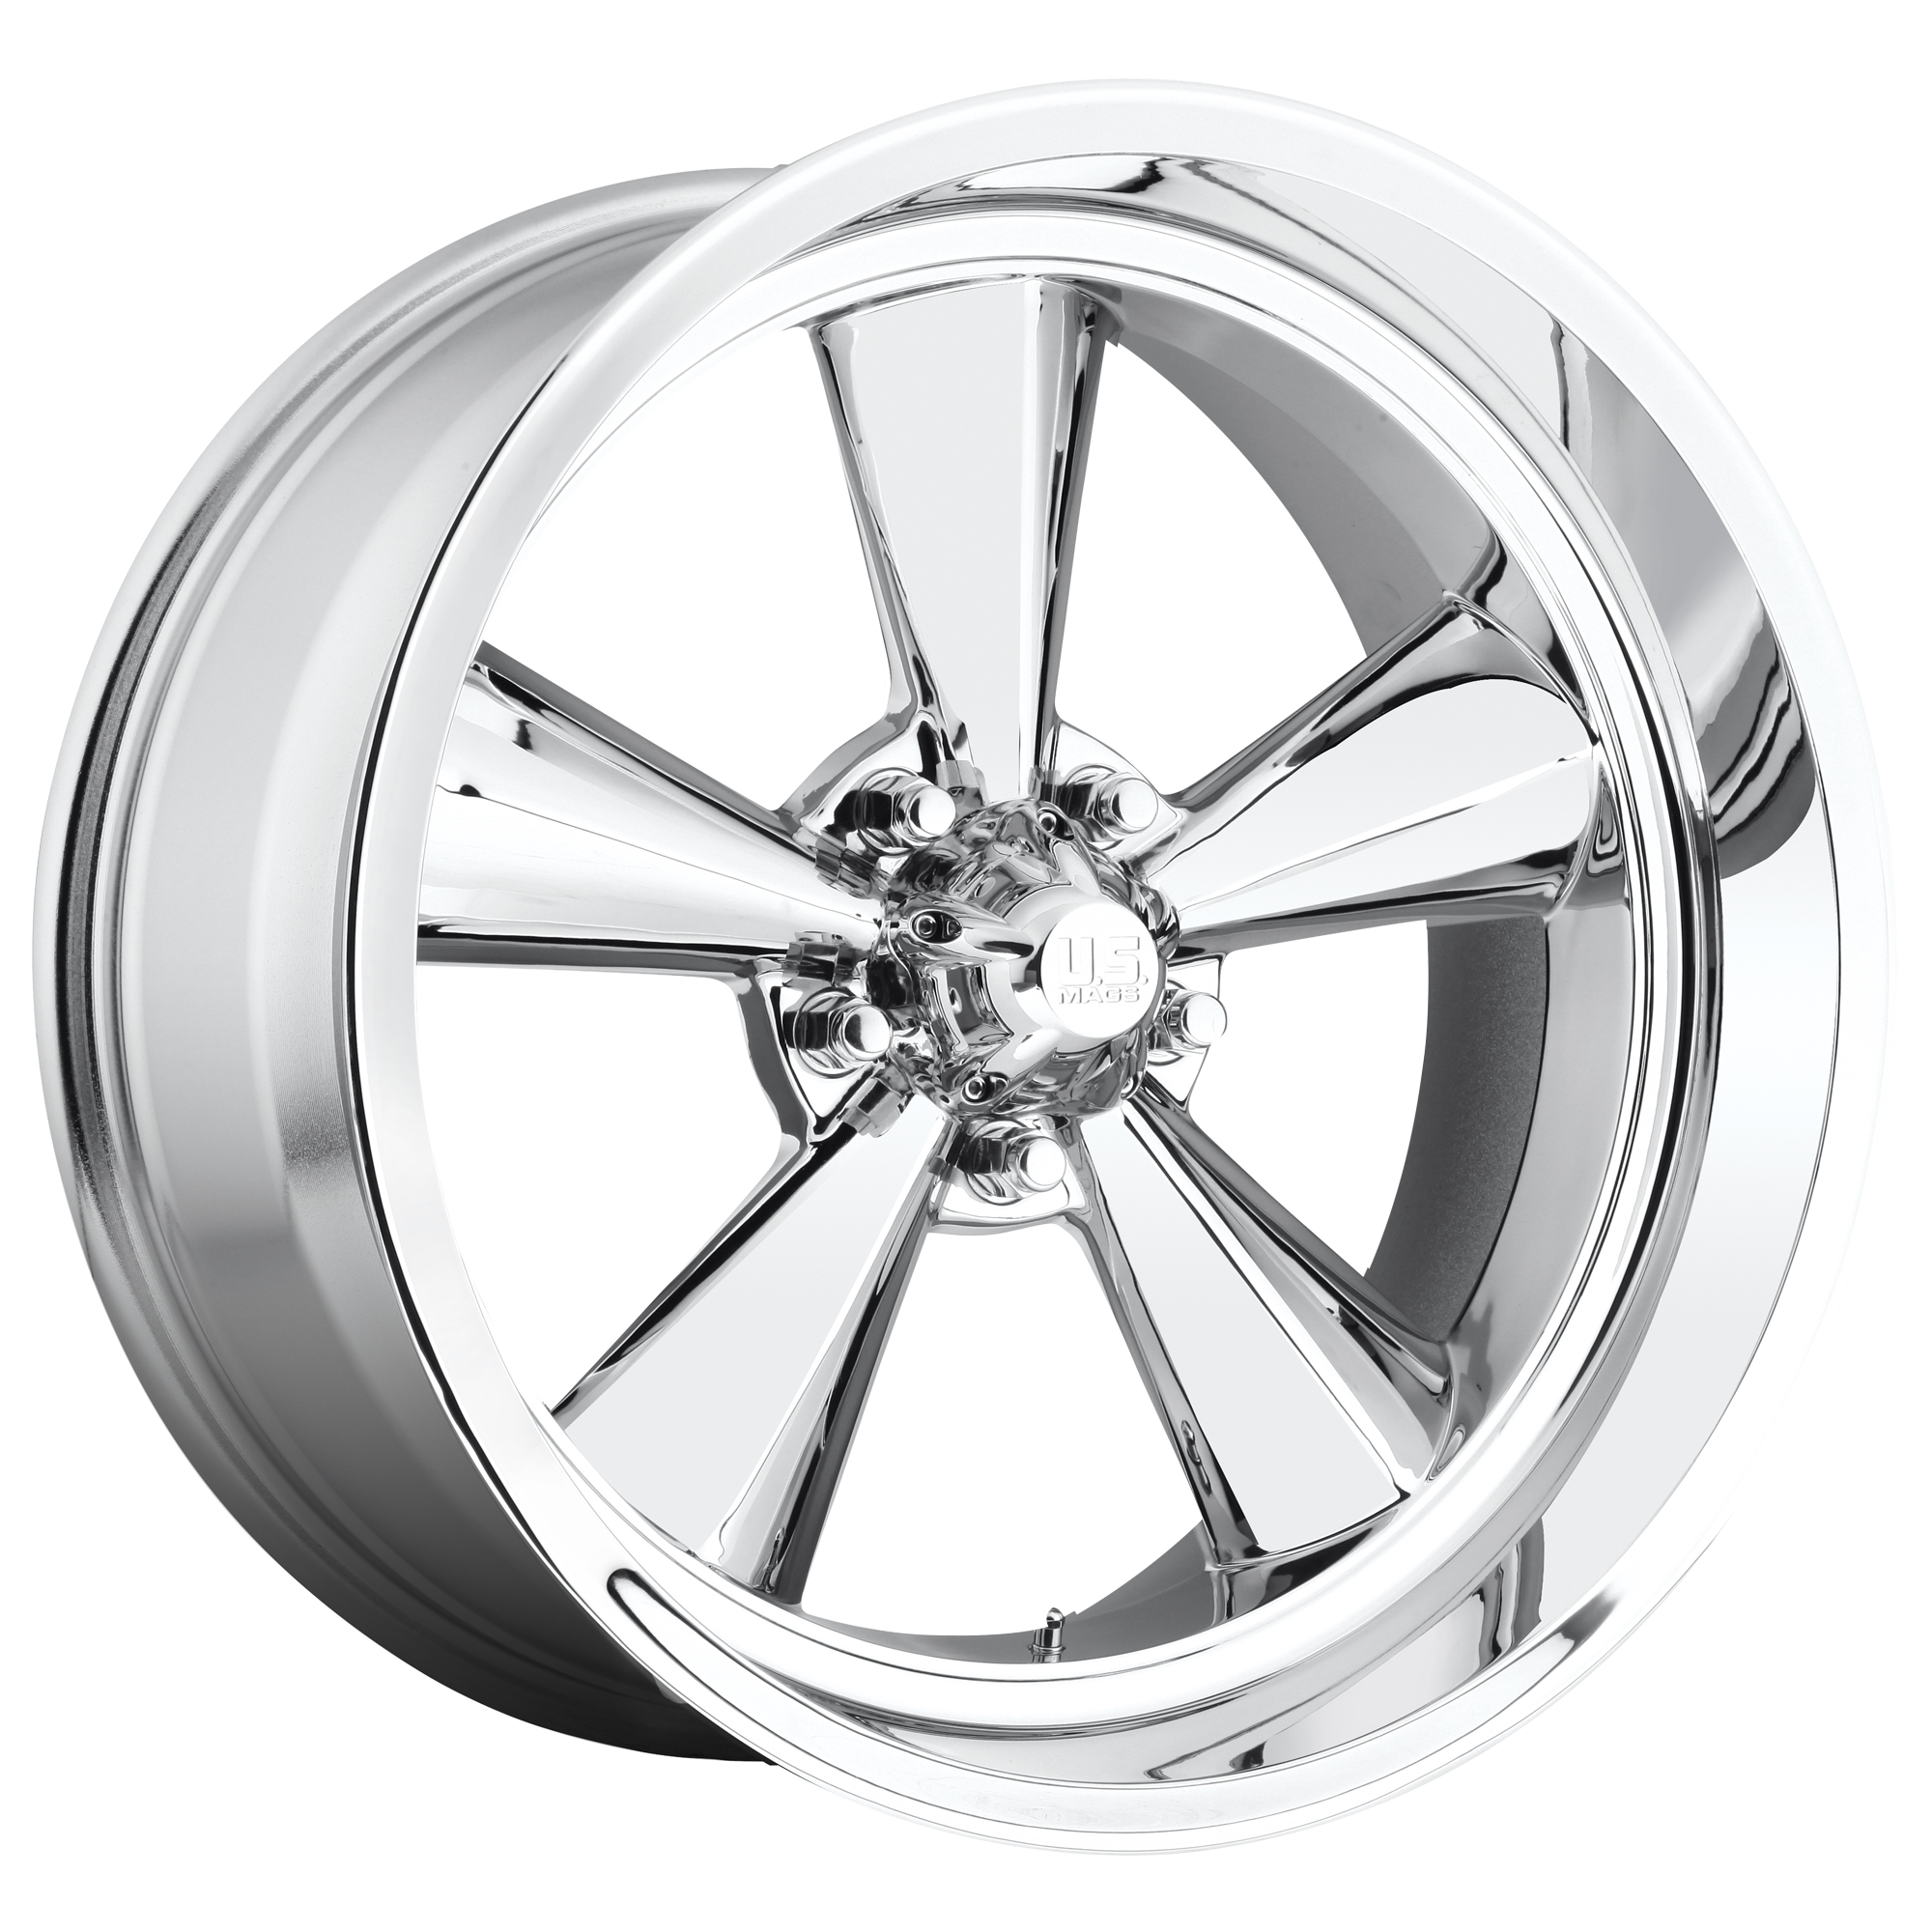 STANDARD 18x9 5x120.65 CHROME PLATED (7 mm) - Tires and Engine Performance